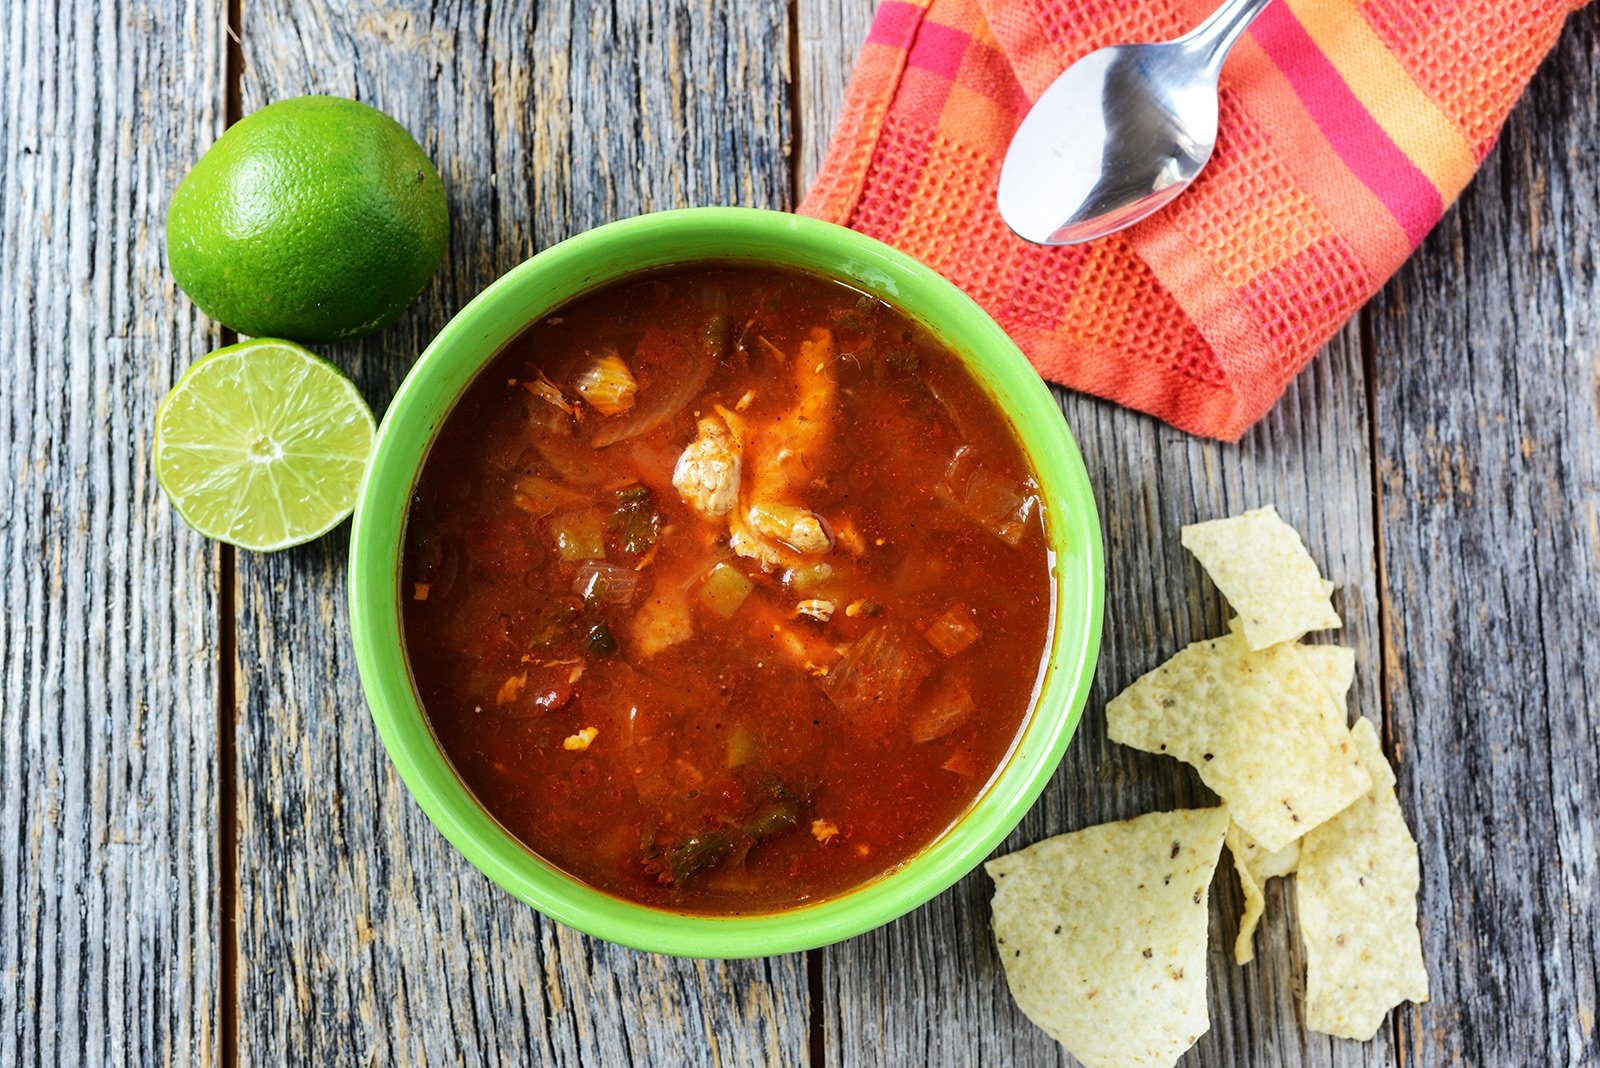 How to taste tortilla soup in Mexico City